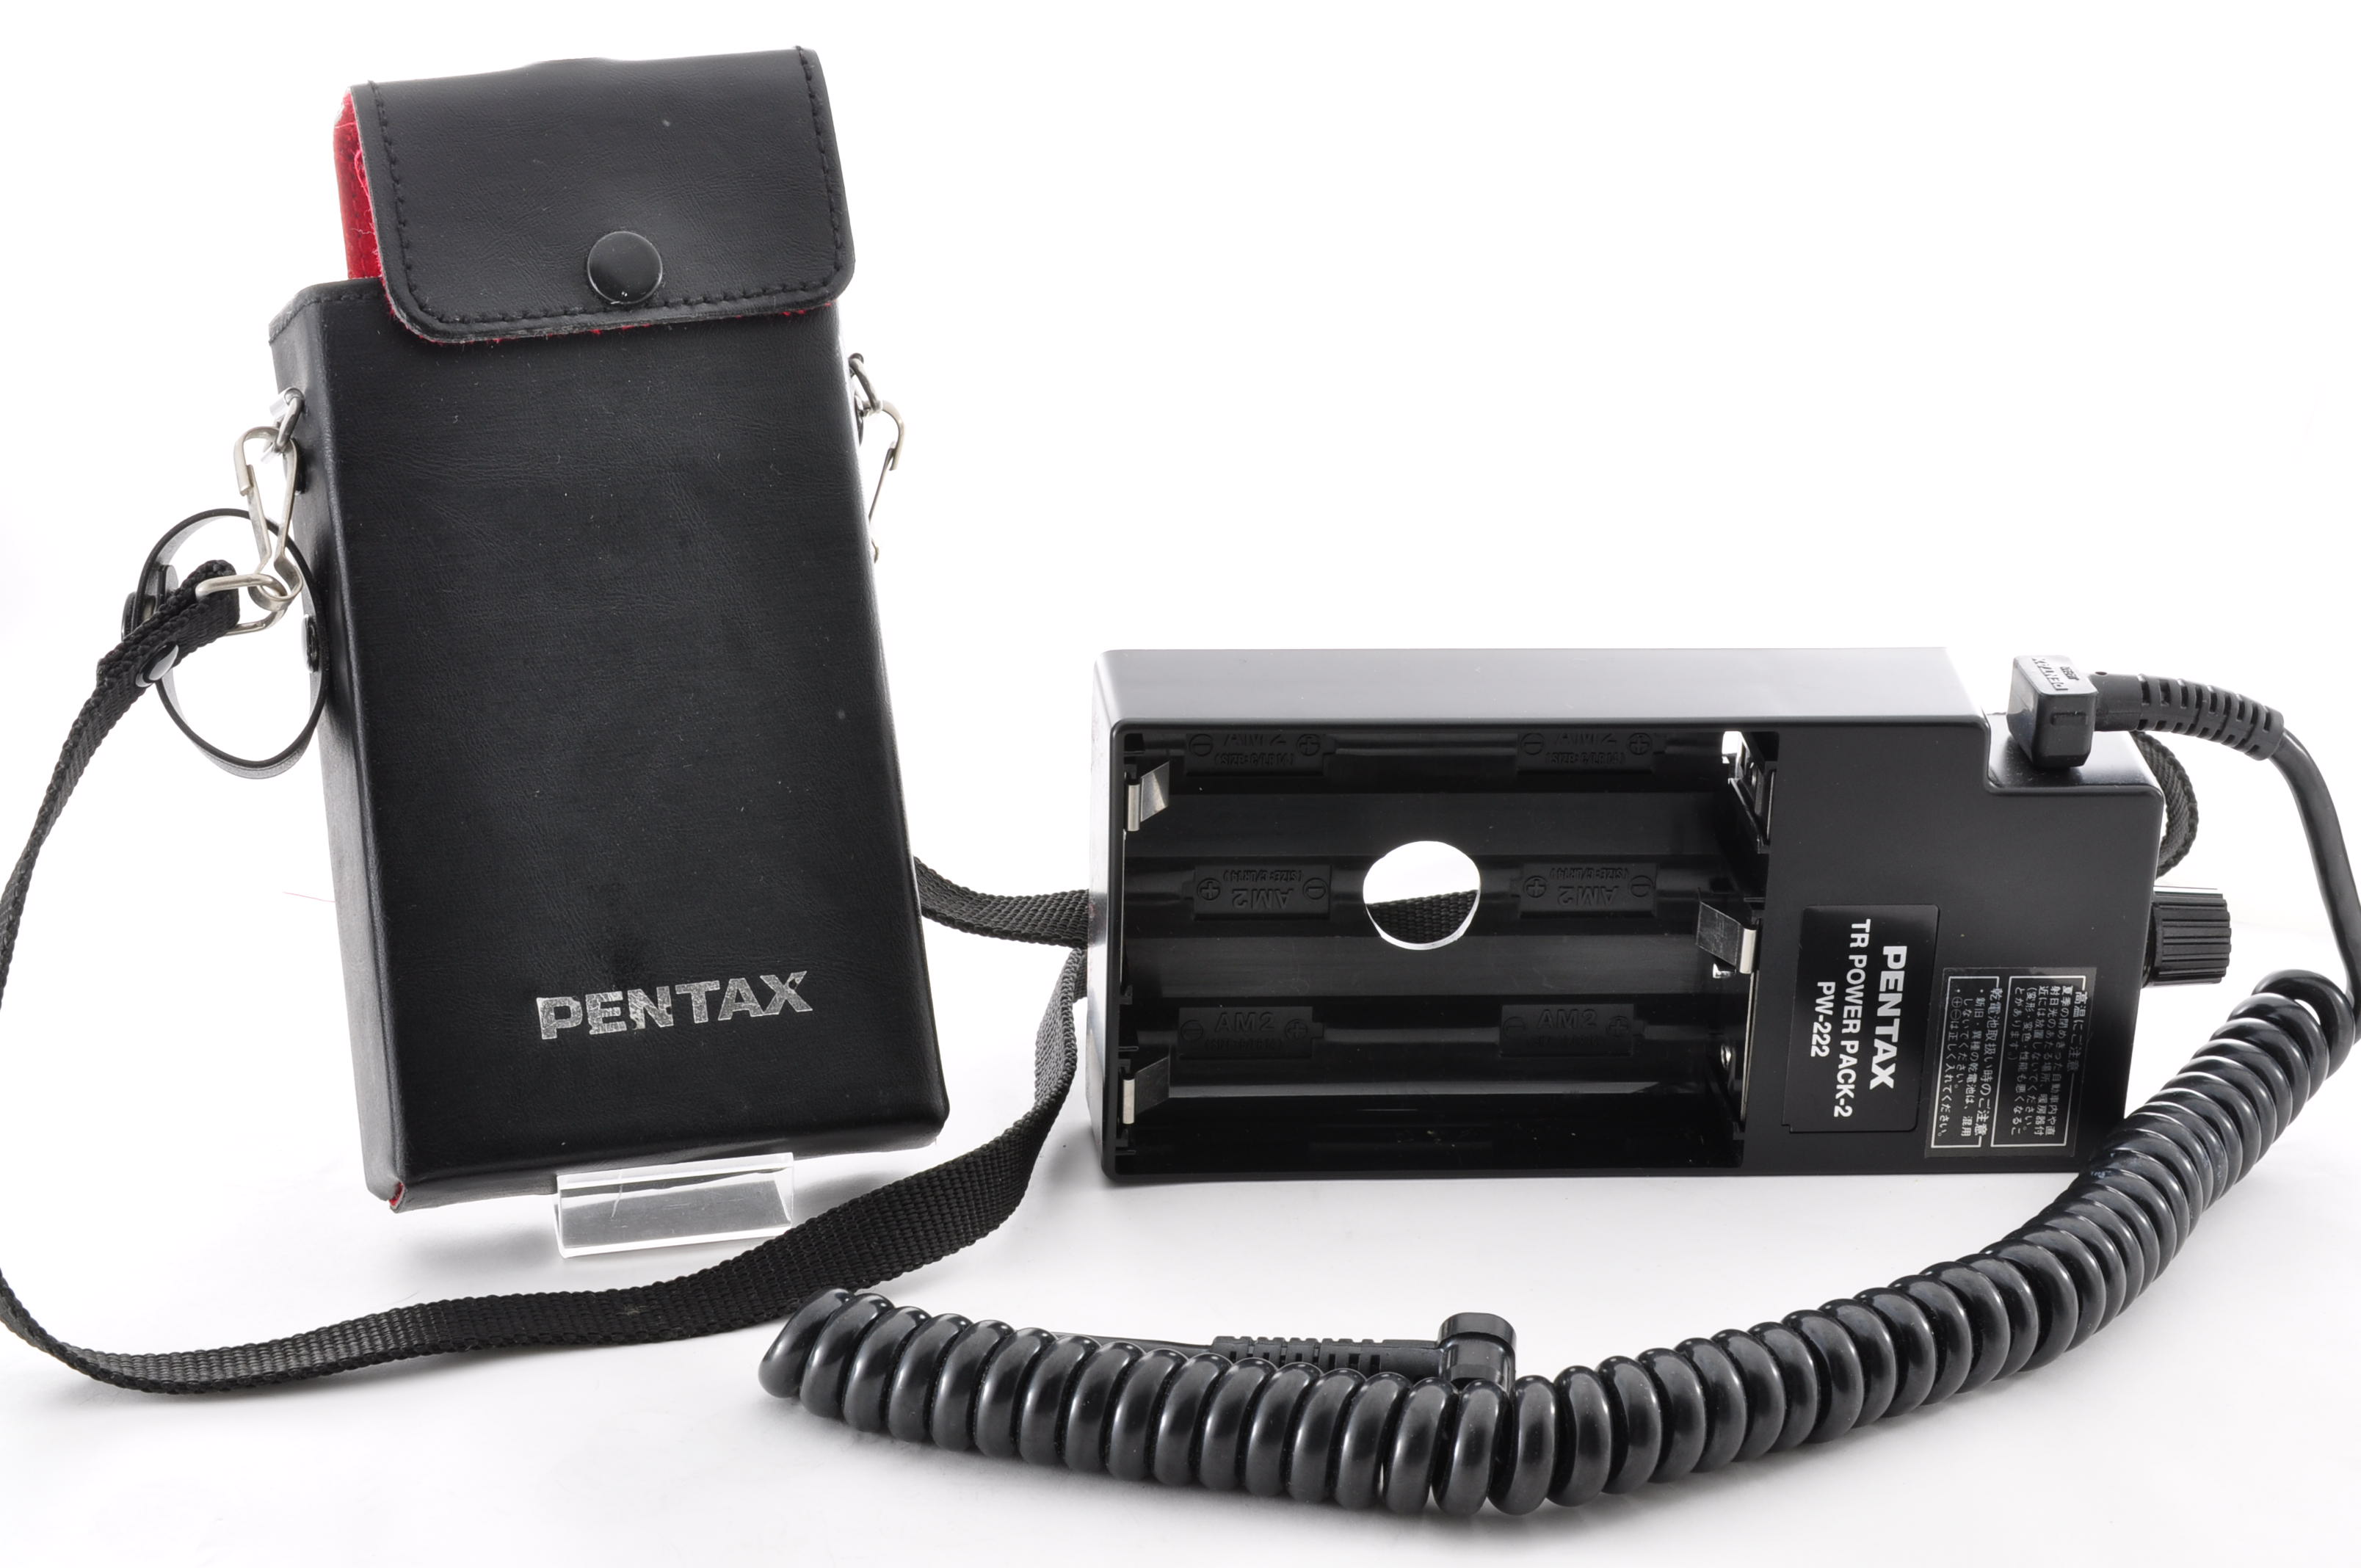 Pentax TR POWER PACK-2 PW-222 External Battery Pack [Near Mint] From Japan img16